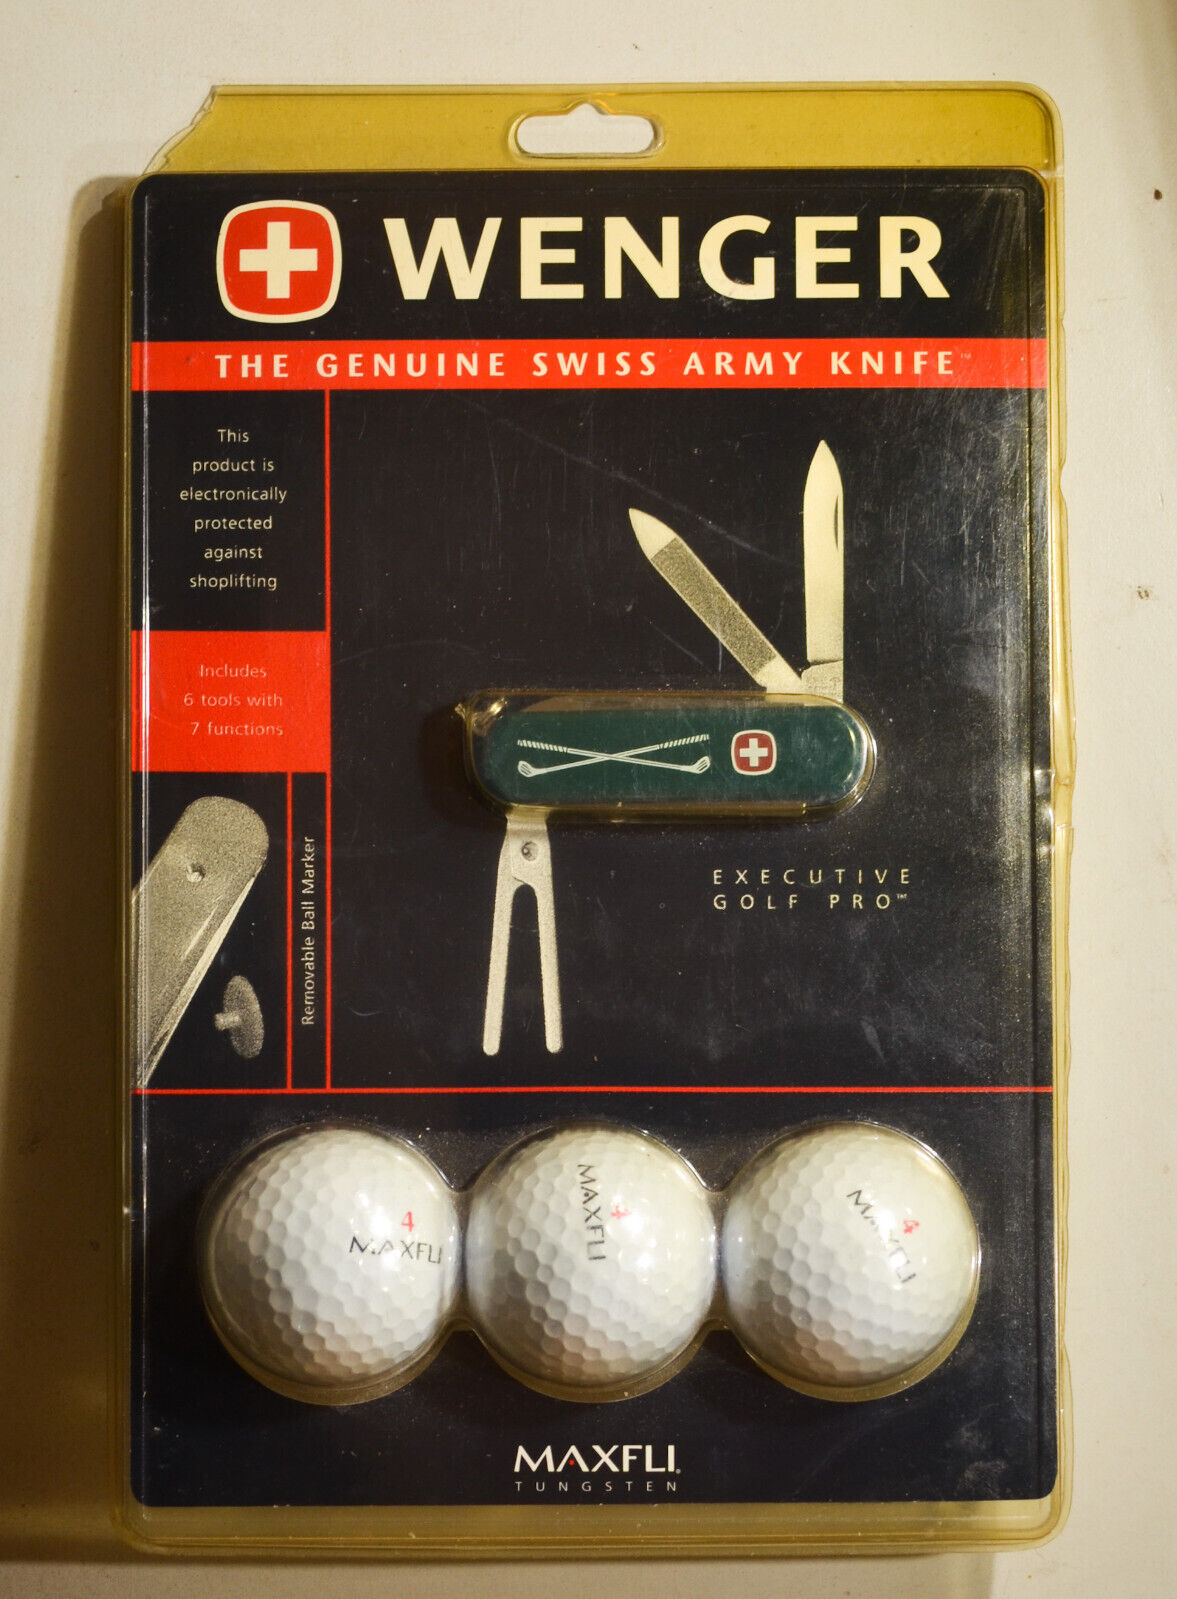 Wenger Executive Golf Pro Swiss Army knife. New with golf balls, NIP #3105